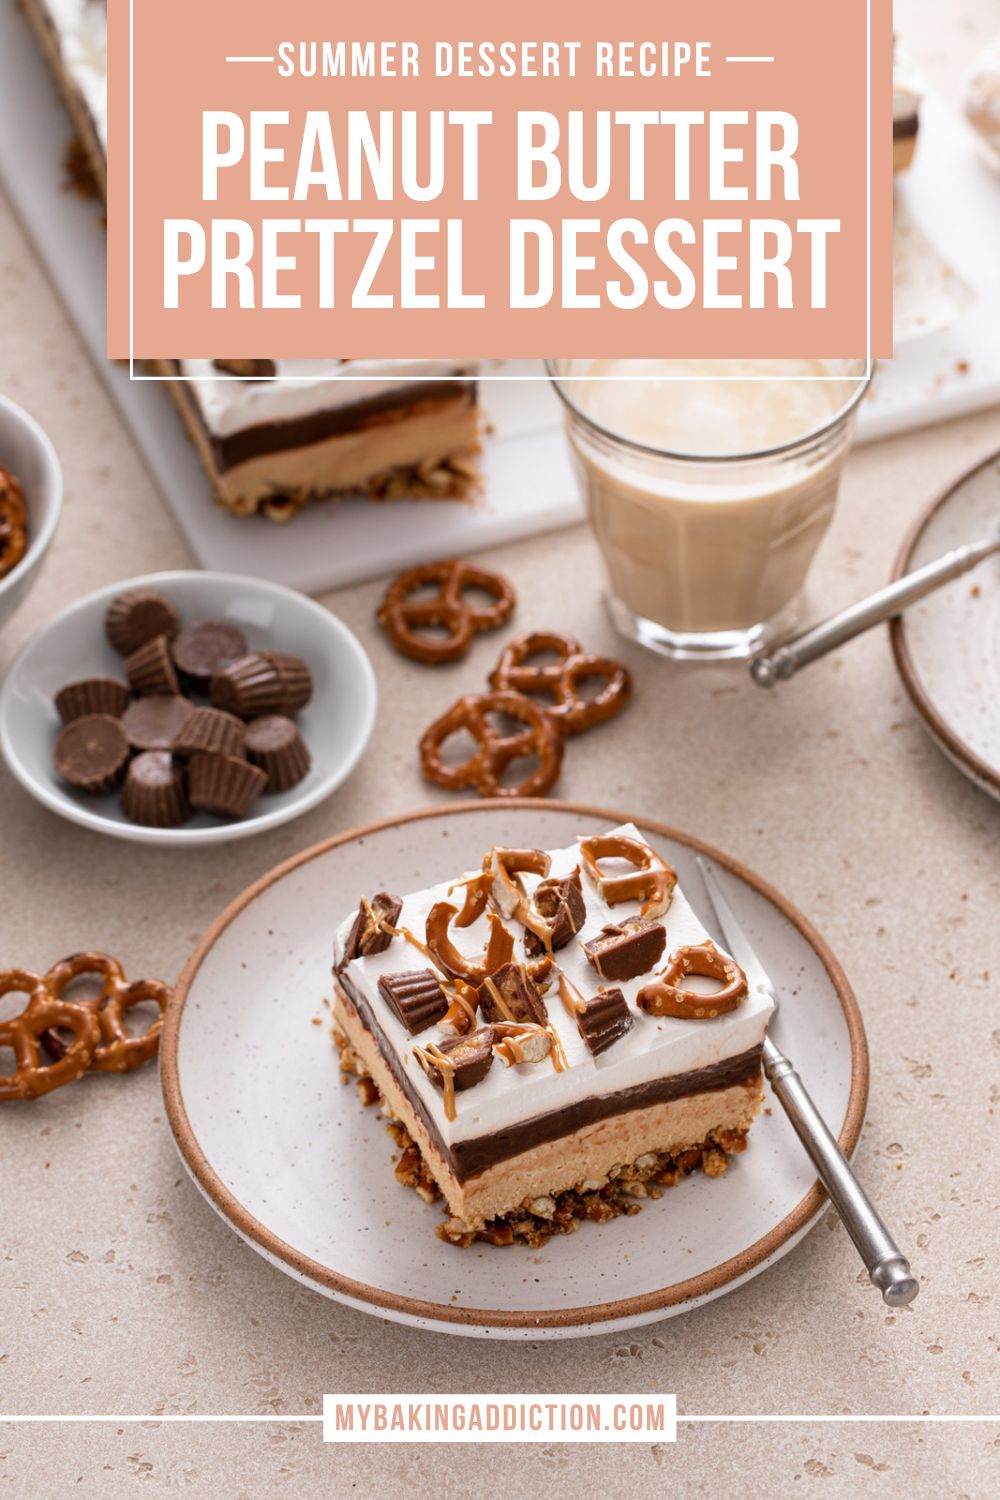 Plated slice of peanut butter pretzel dessert with a cup of coffee and more of the dessert in the background. Text overlay includes recipe name.